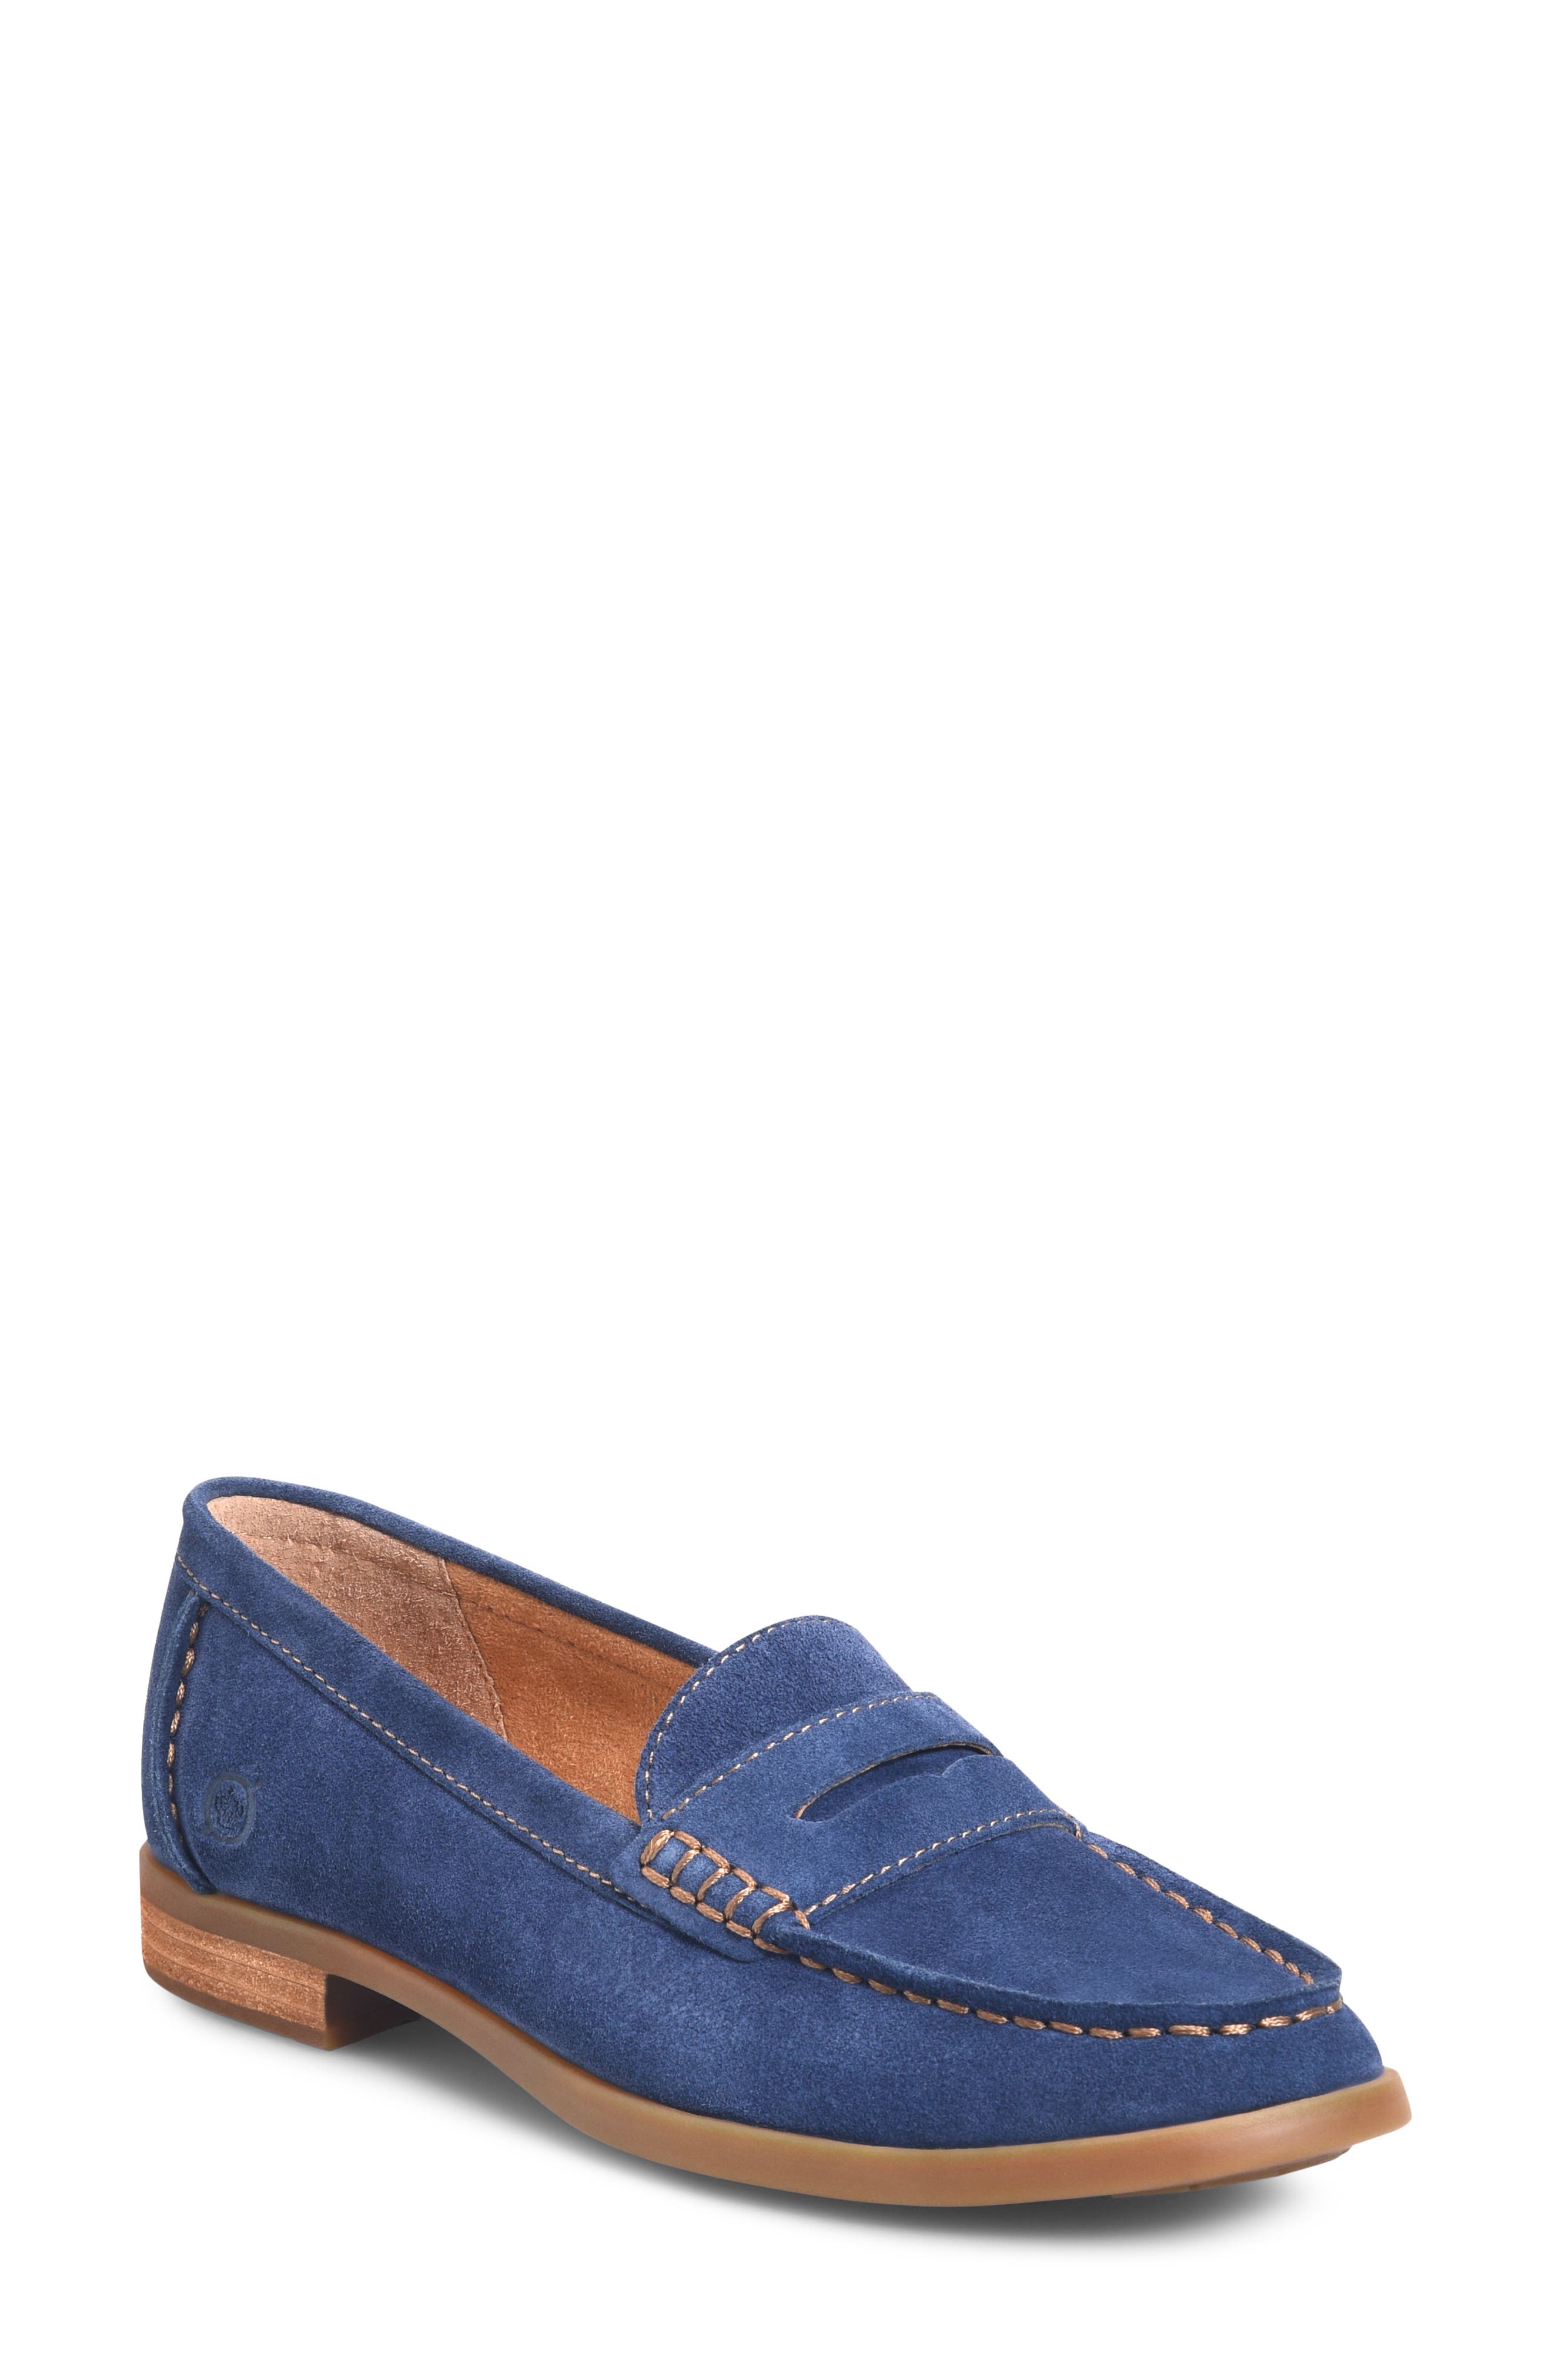 clarks kendrick drive blue loafers